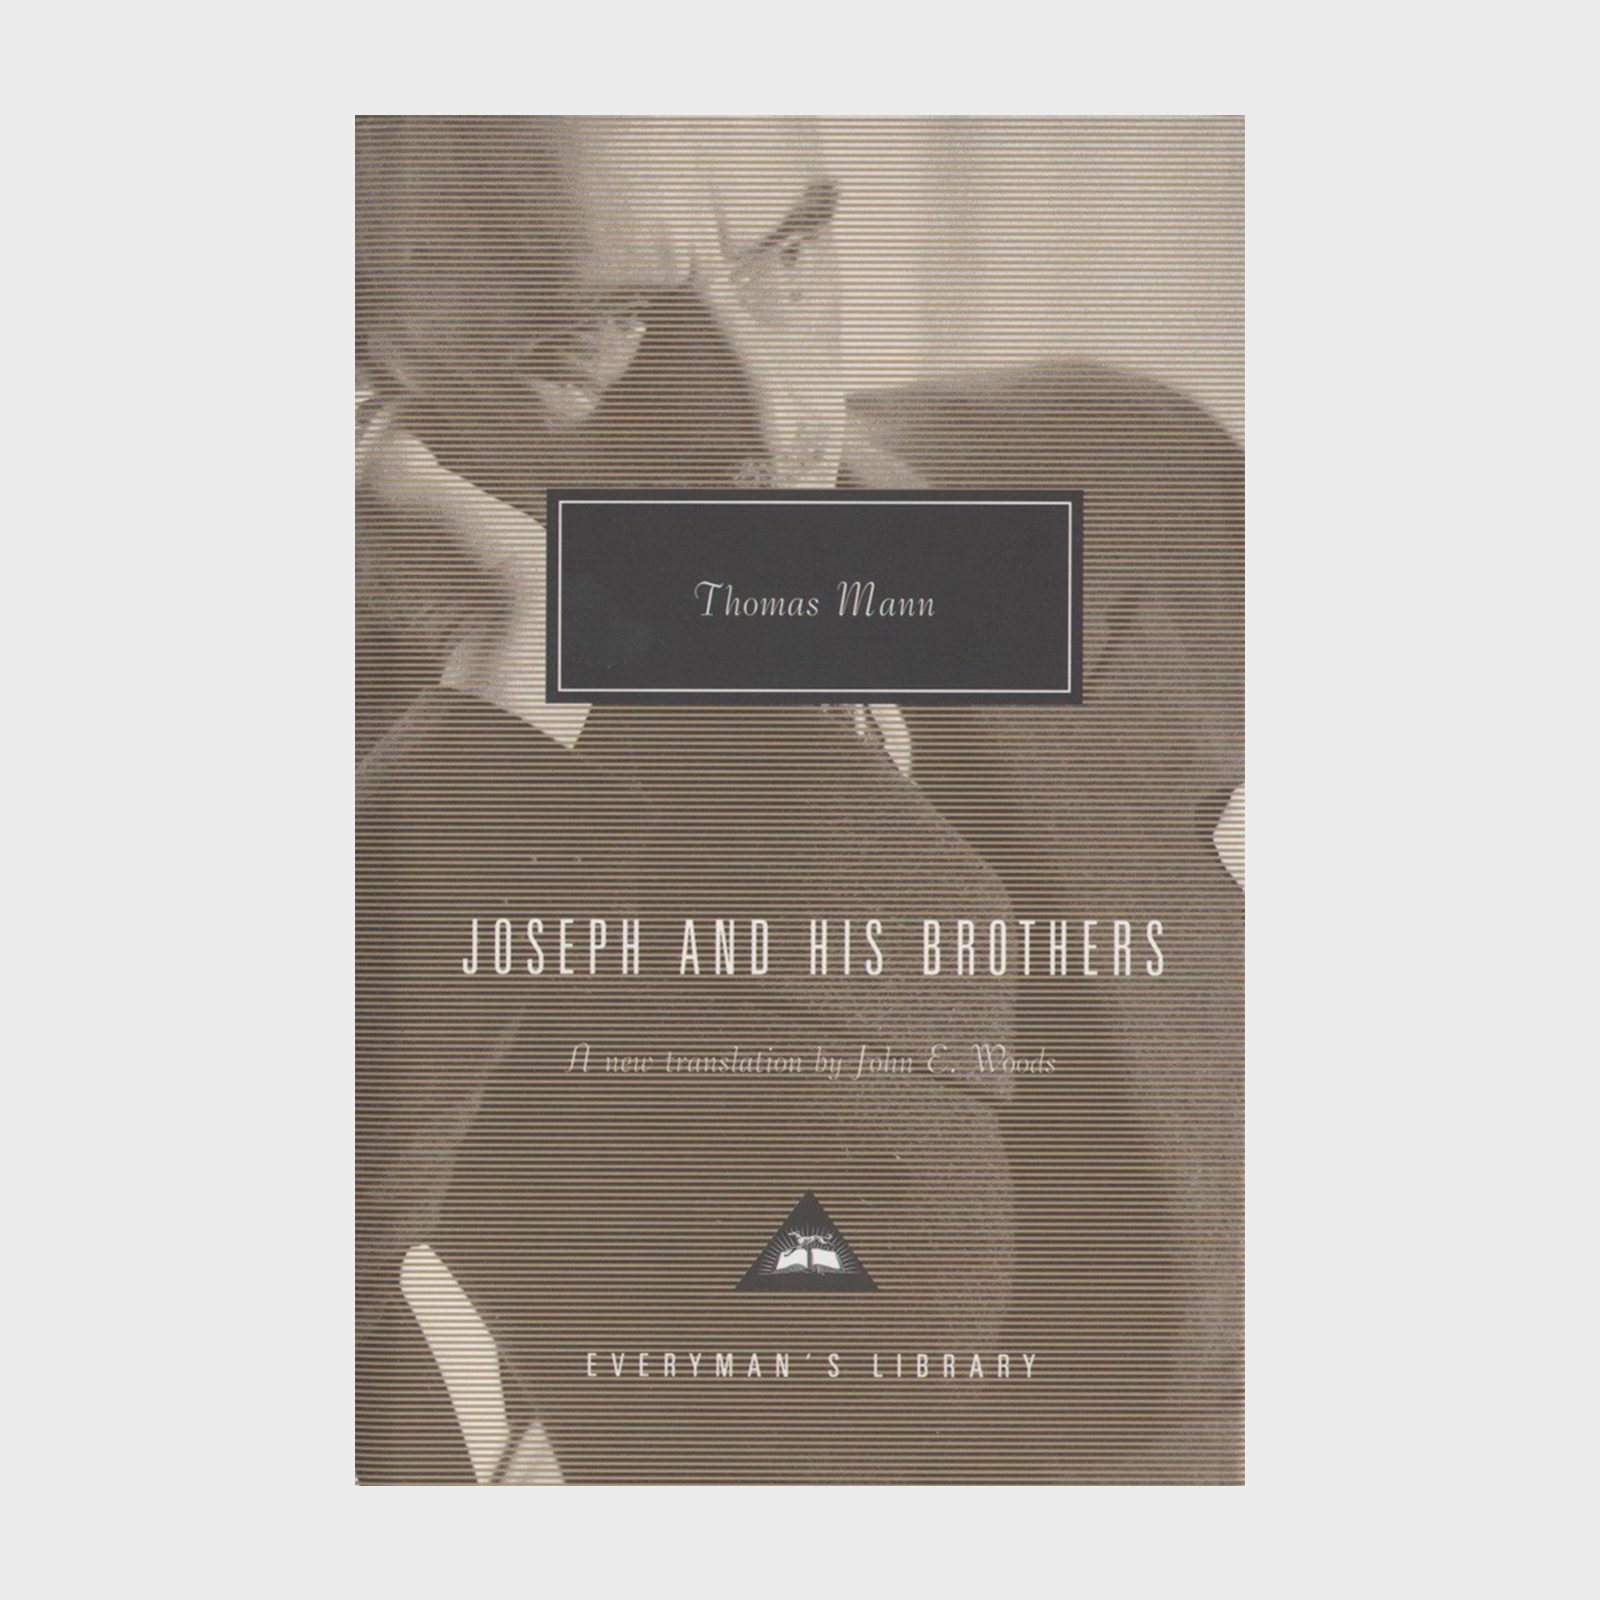 Joseph and His Brothers by Thomas Mann